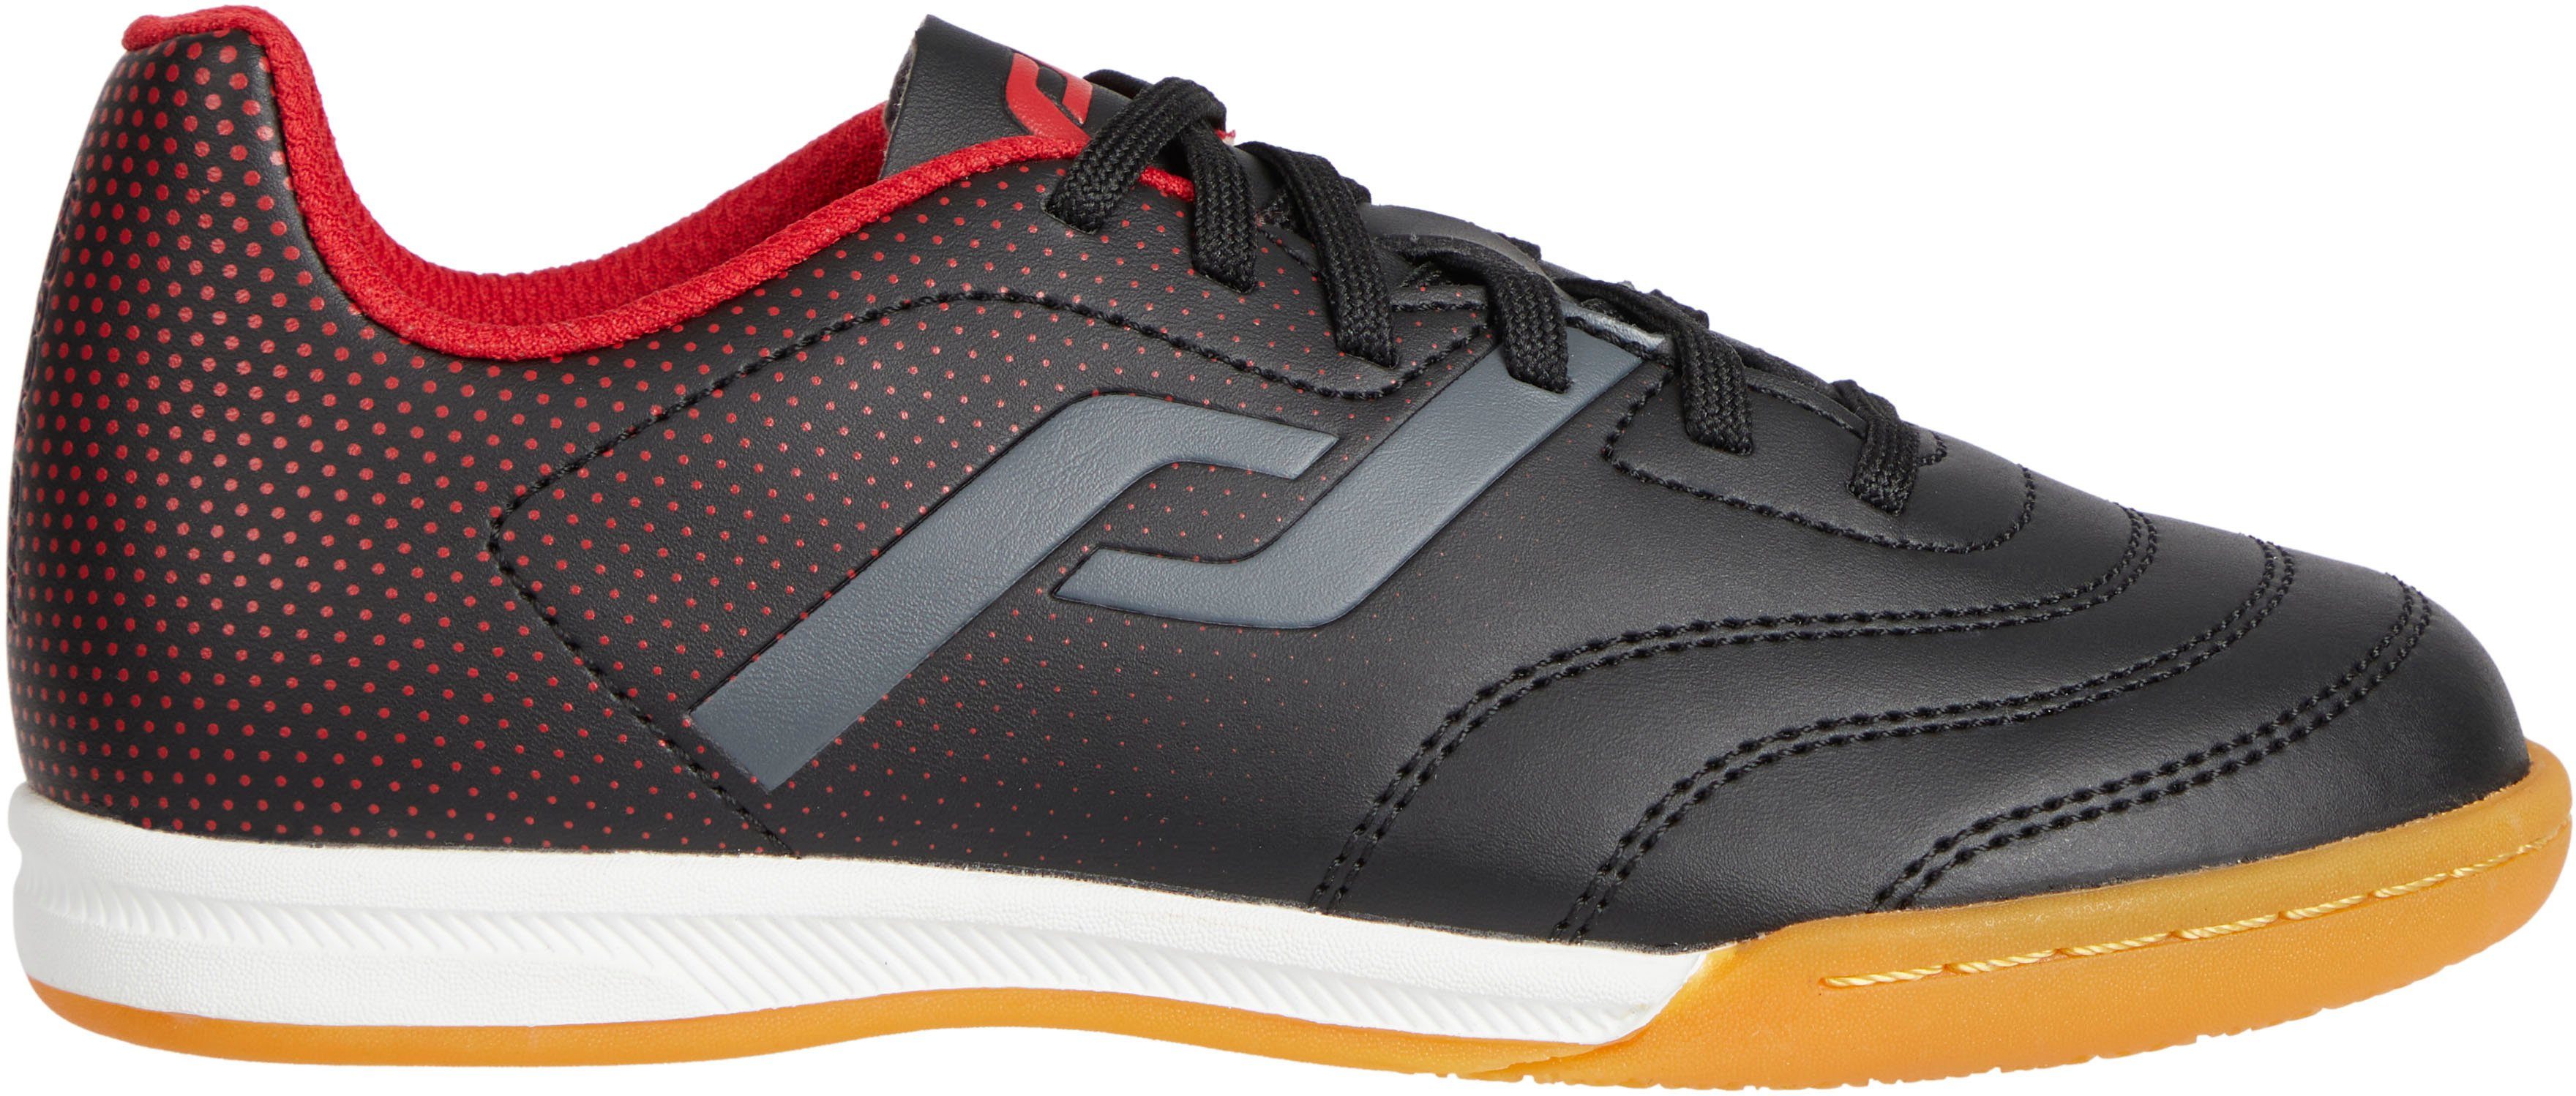 Pro Ind Classic Touch JR Fußballschuh BLACK/RED/ANTHRACITE IN III